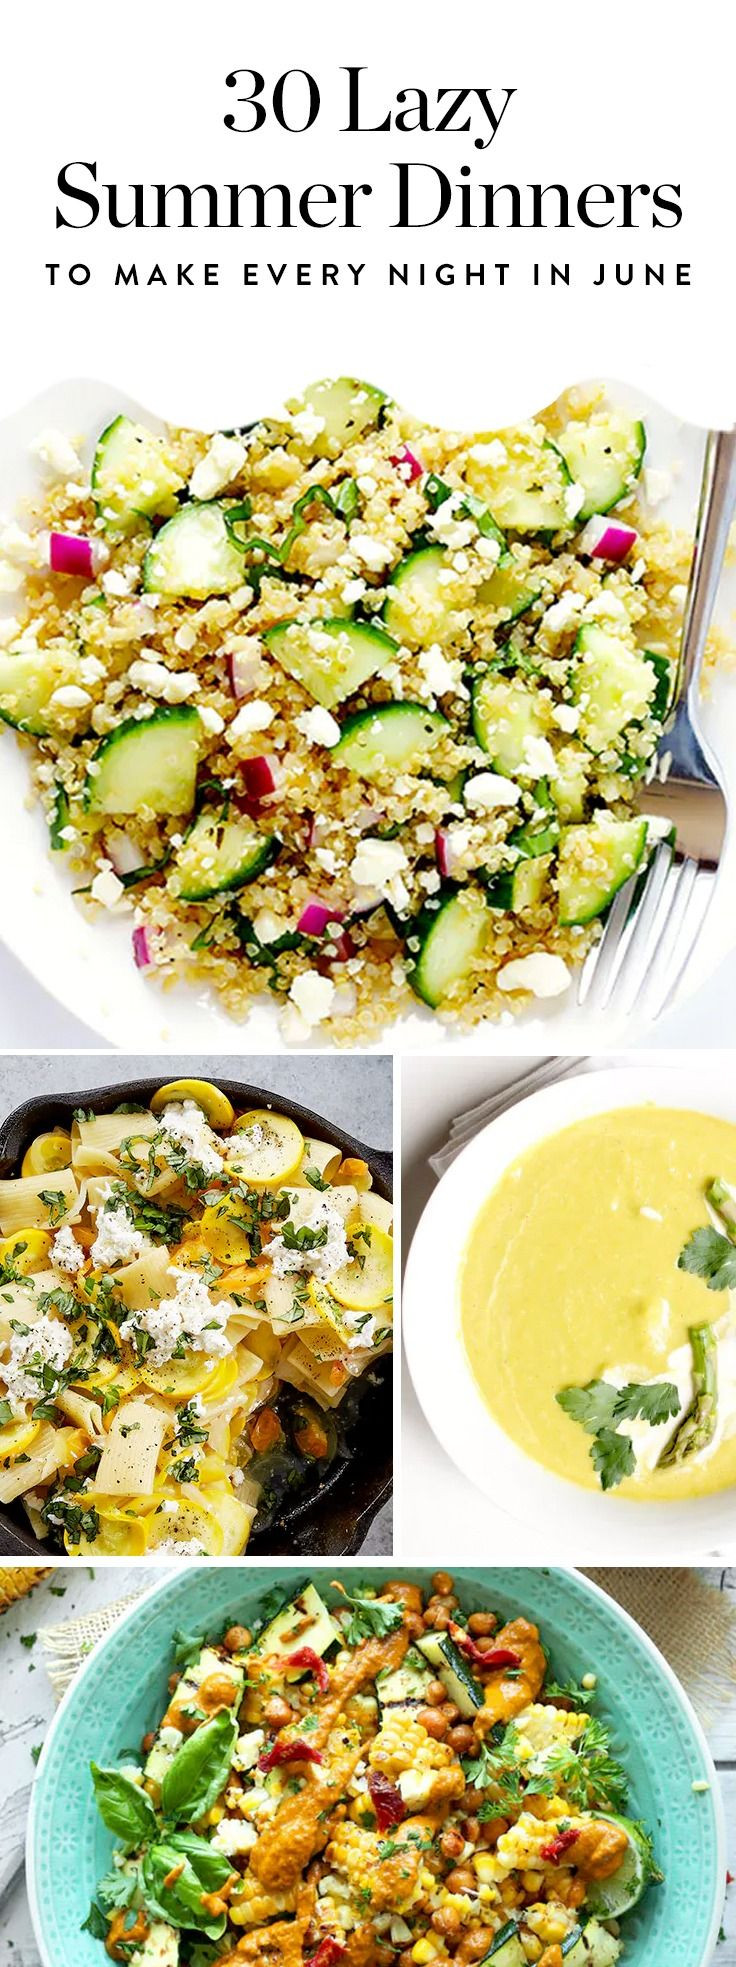 Healthy Summer Dinner
 30 Lazy Summer Dinners to Make Every Night in June